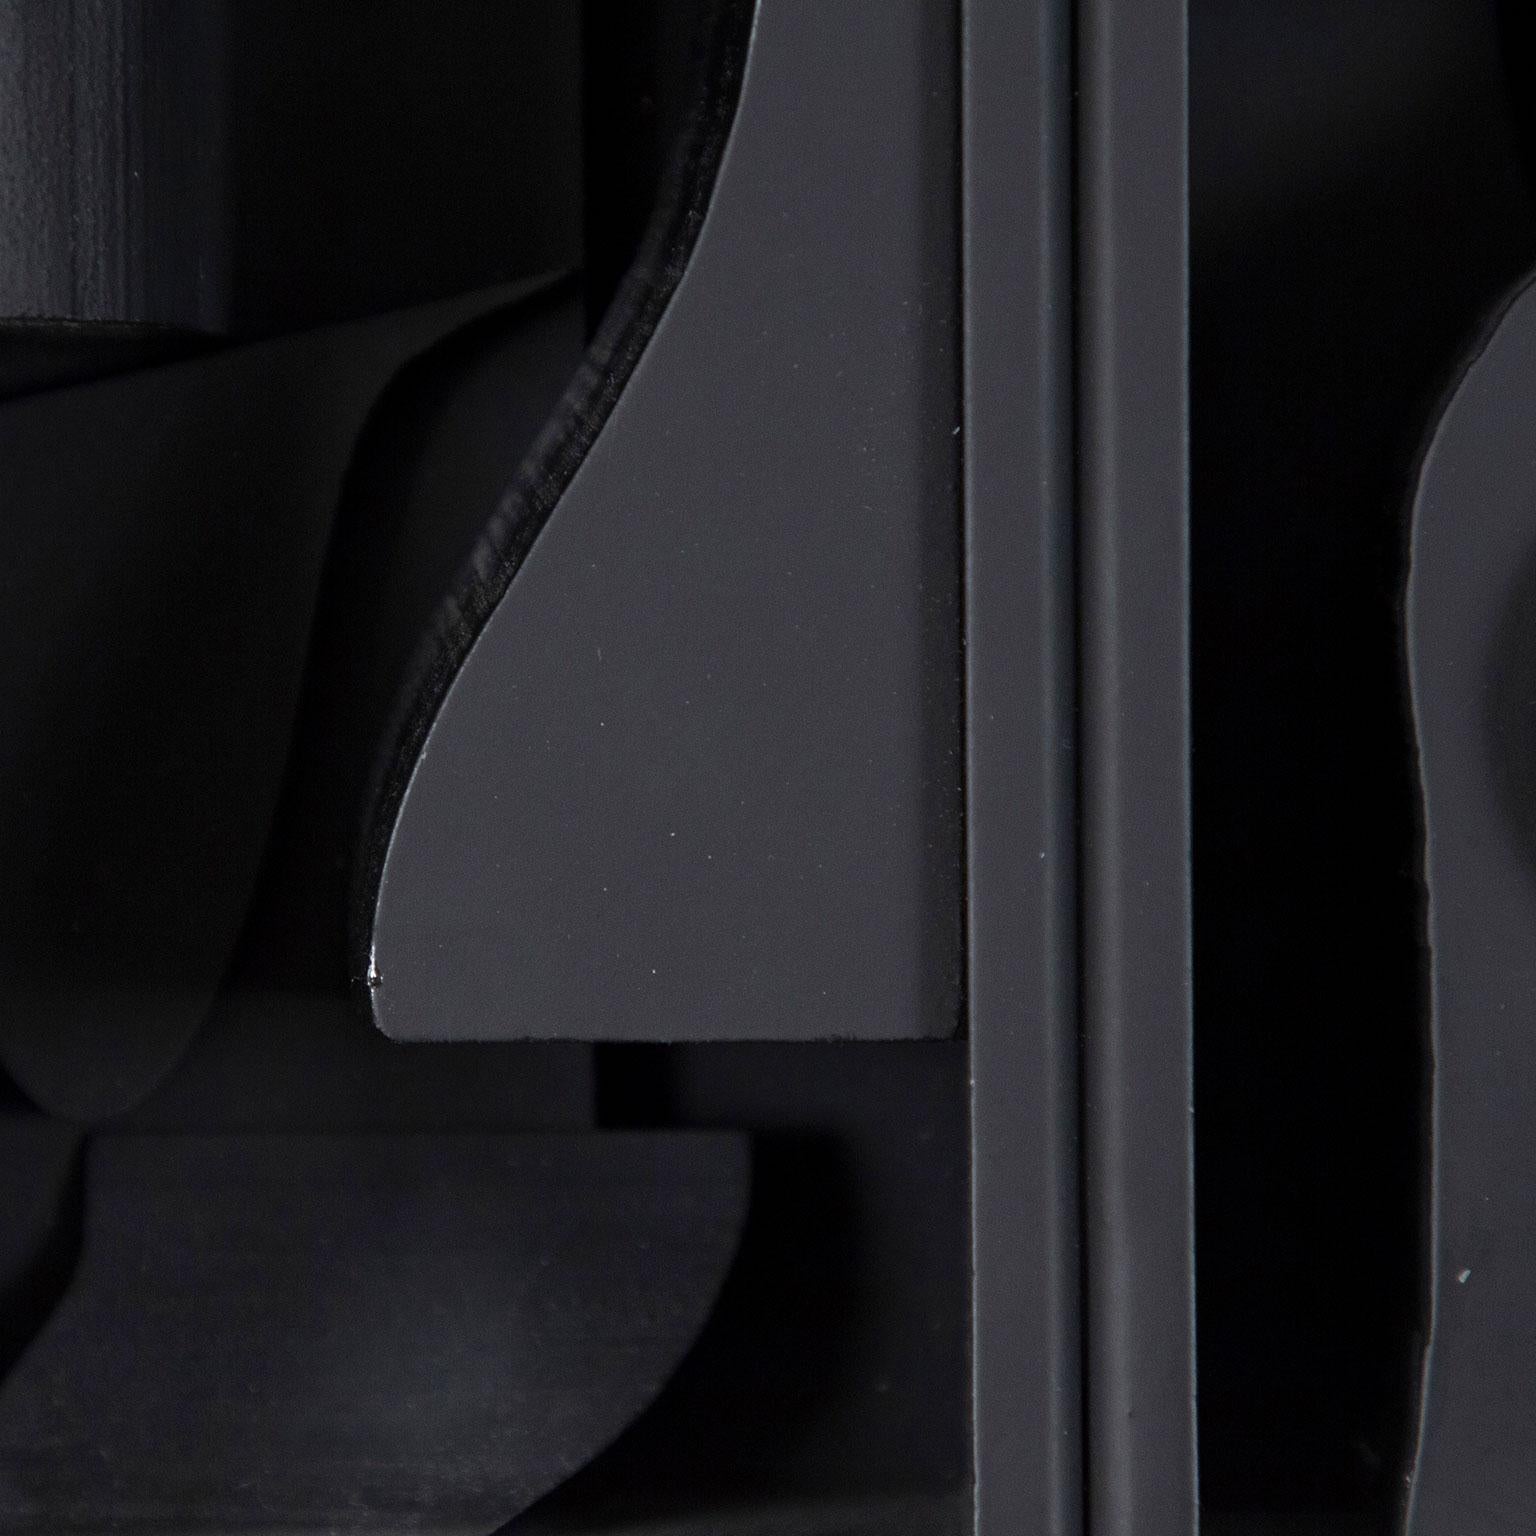 Louise Nevelson (1899-1988) is one of the most revered and unique artists of the 20th century.  

There has been a tremendous renewal of interest and appreciation for Nevelson’s work in recent years. In 2021, a new auction record of $1.35 million